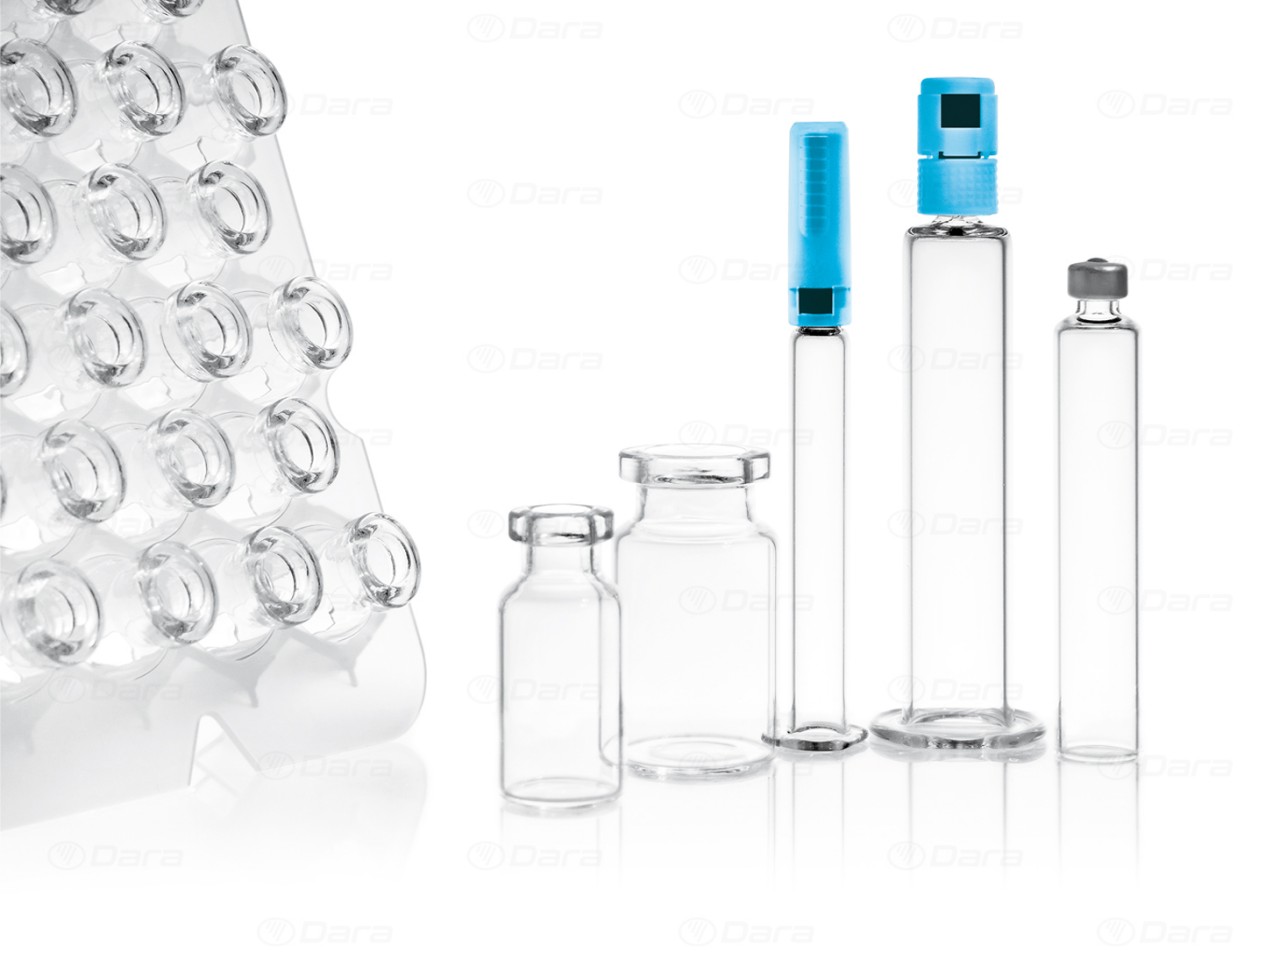 Fillers - seamers for vials, syringes and cartridges at "Nest"